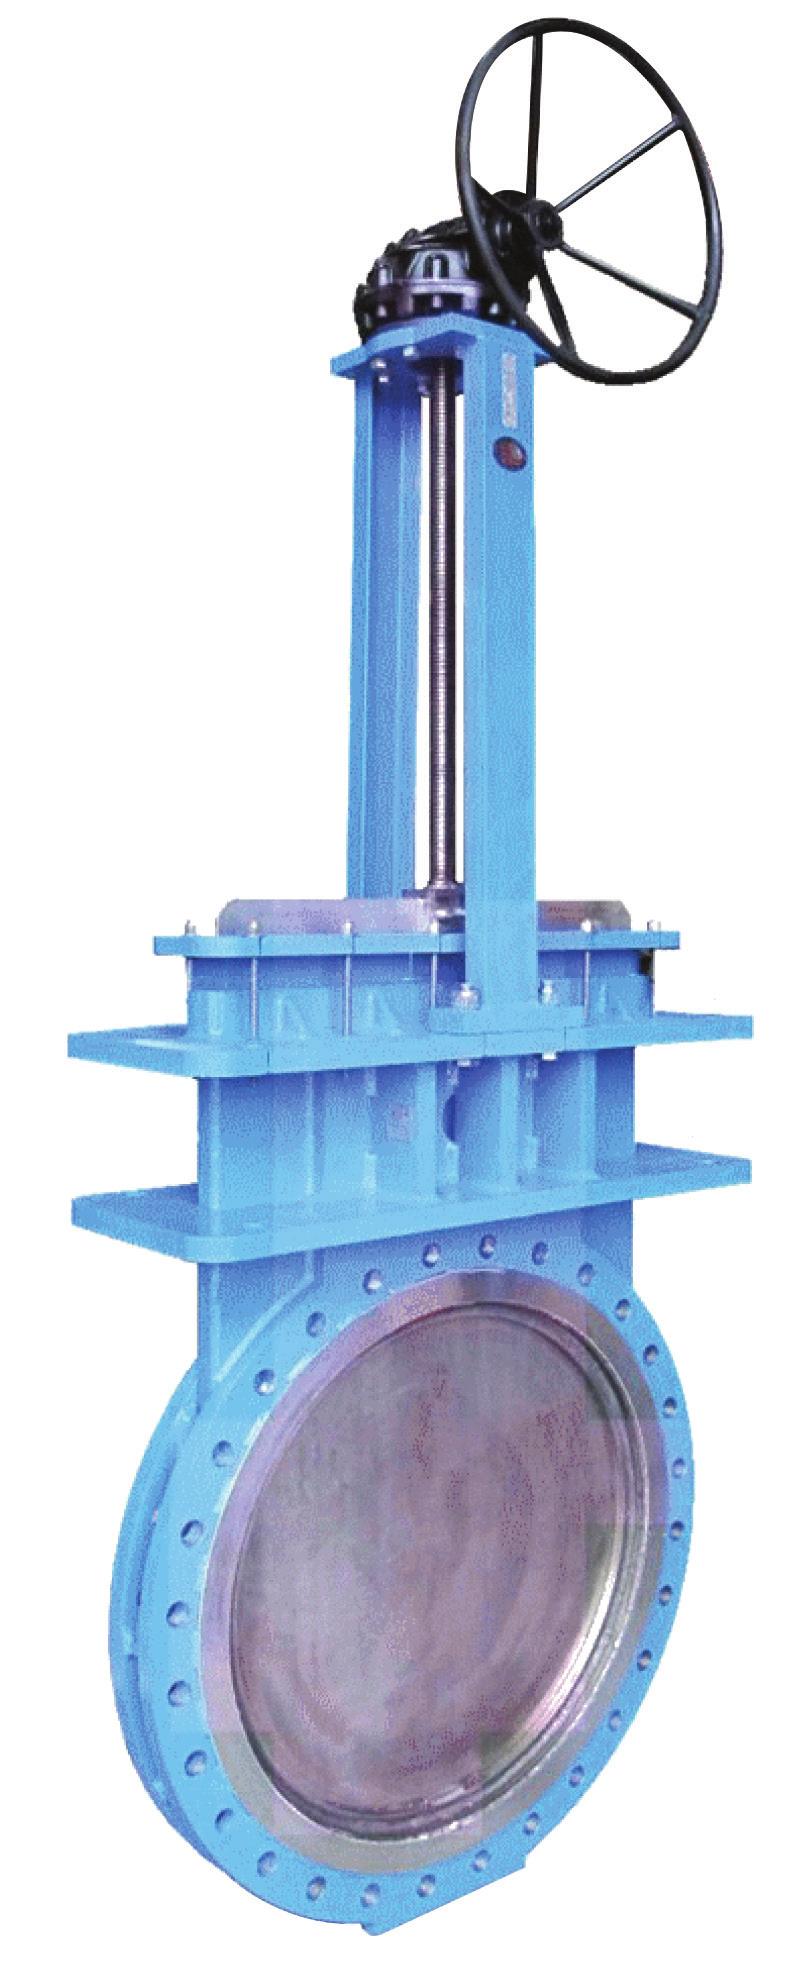 Figure F77 Fabricated Large Diameter Knife Gate Valve Fabricated heavy duty carbon steel body, flanges, packing gland, and yoke. All stainless steel construction available.